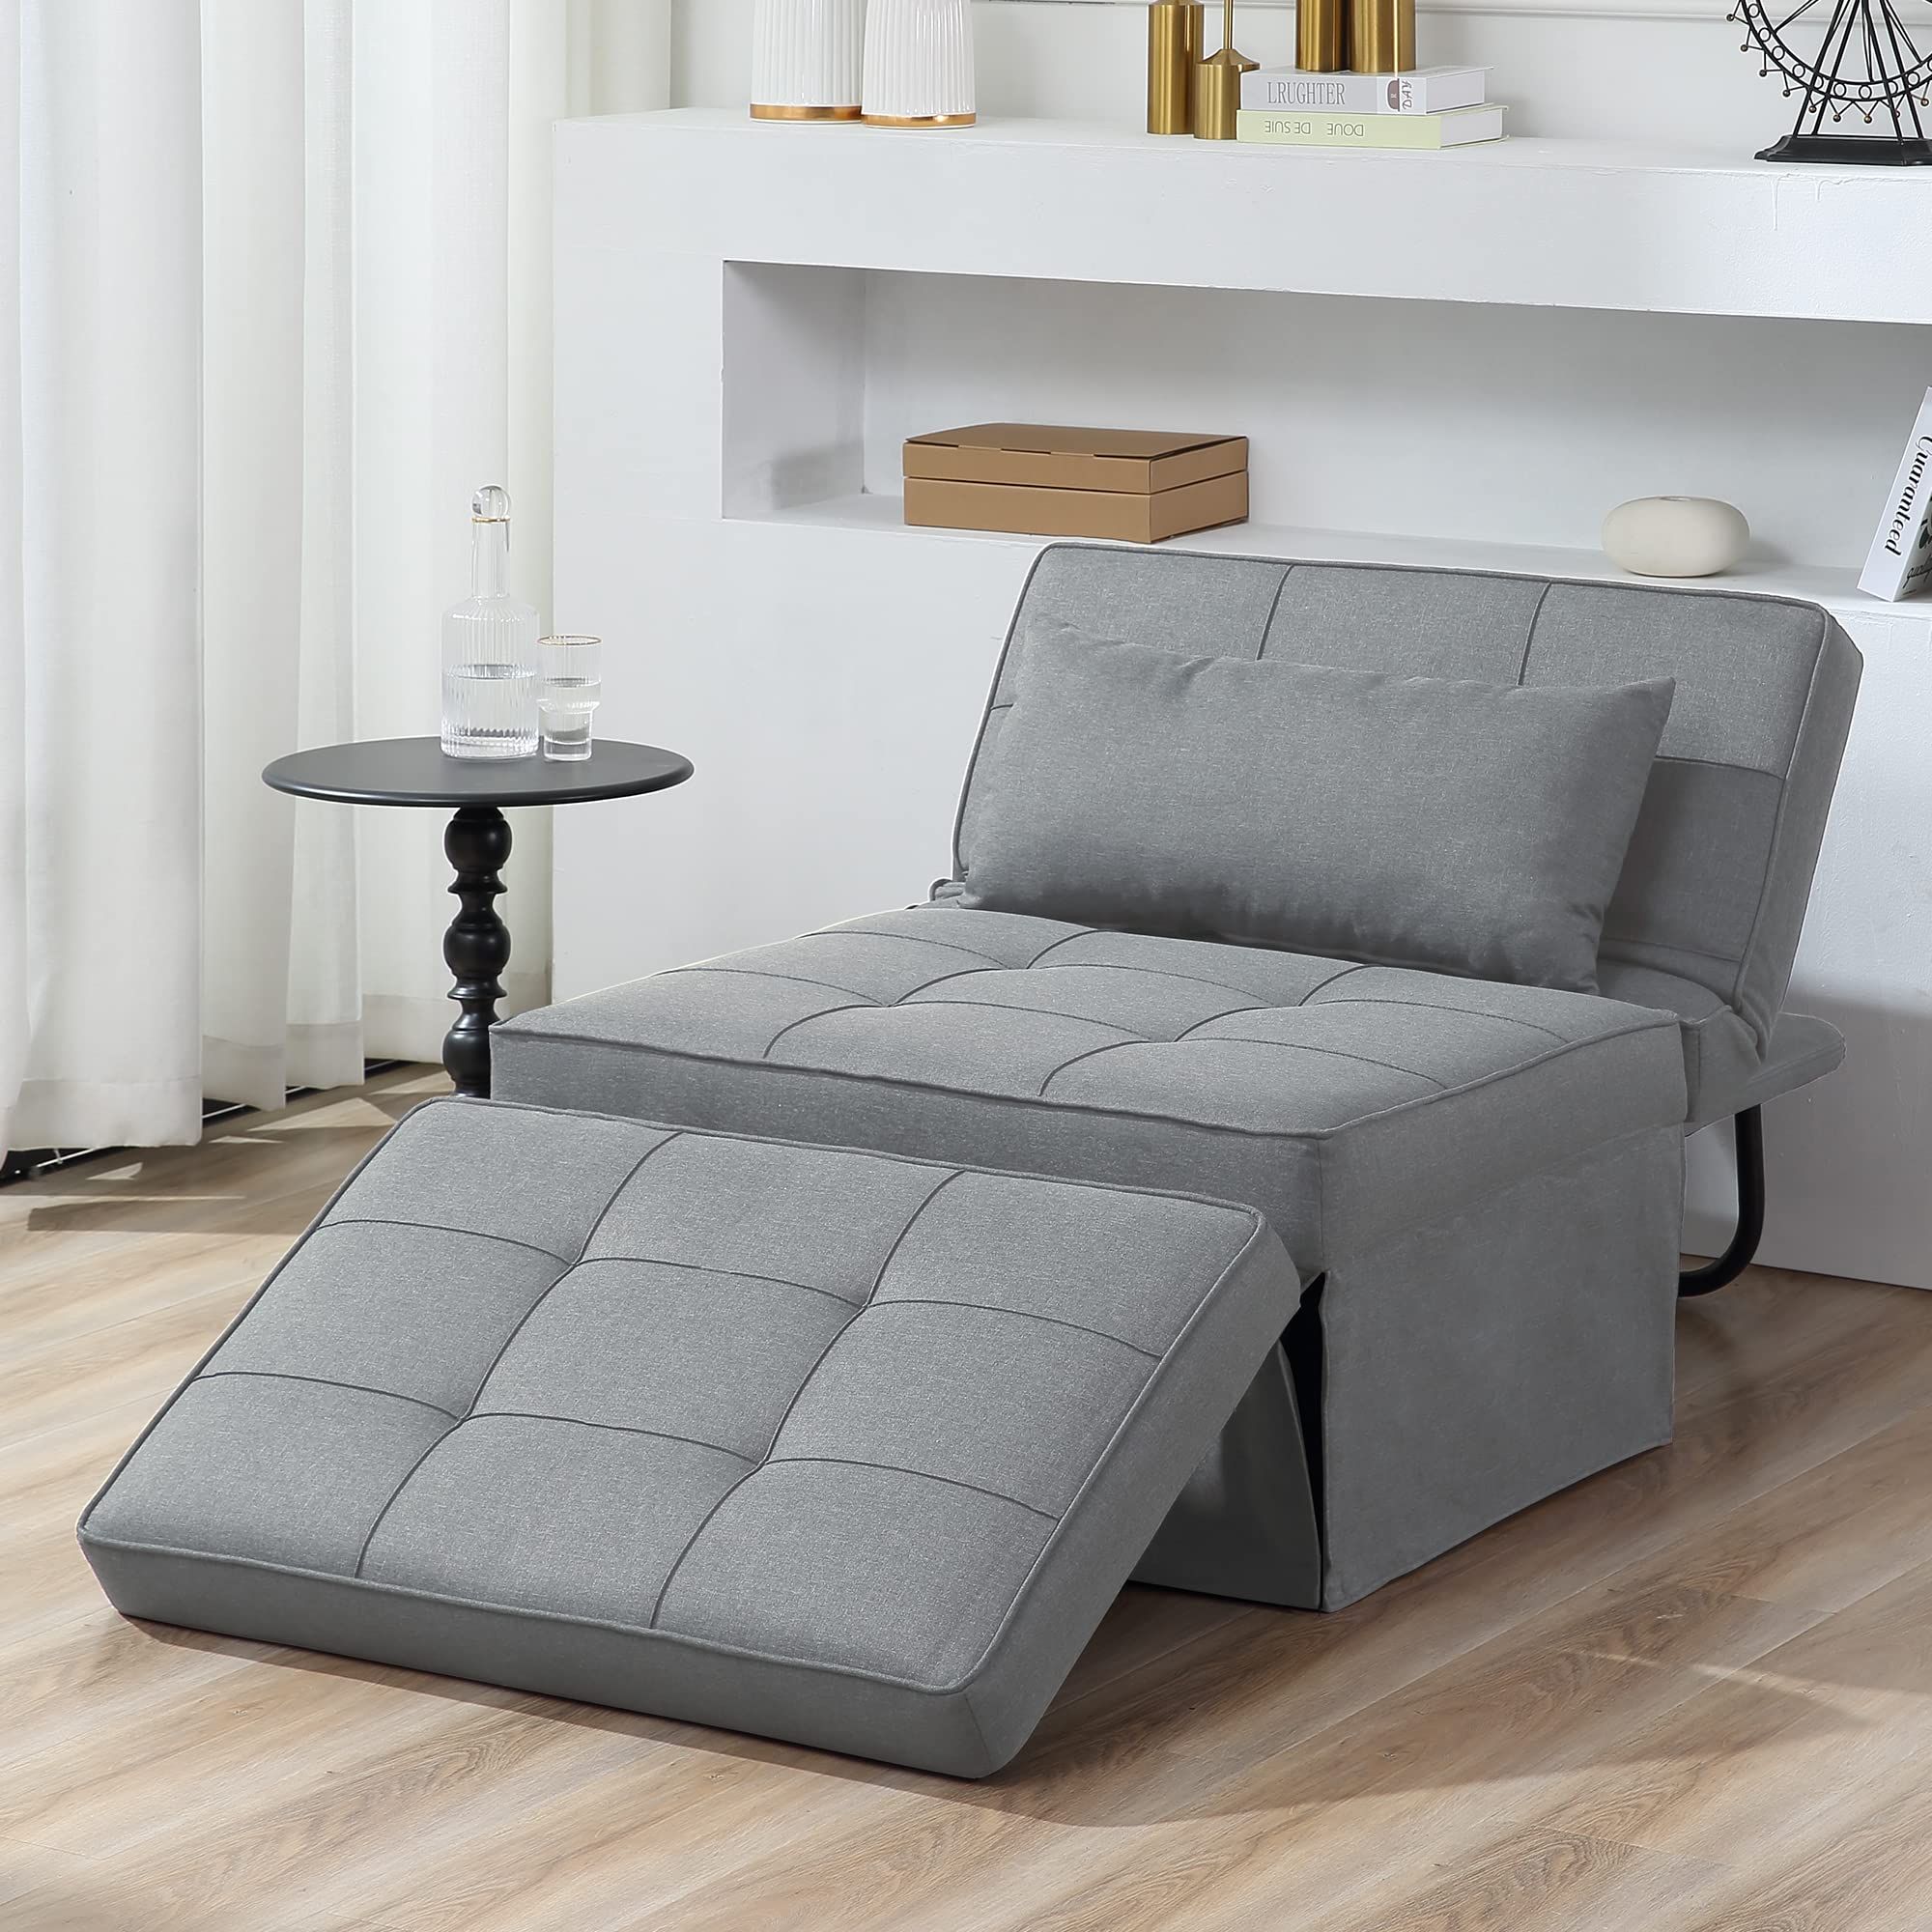 Awesome And Cozy Sofa Bed Chairs